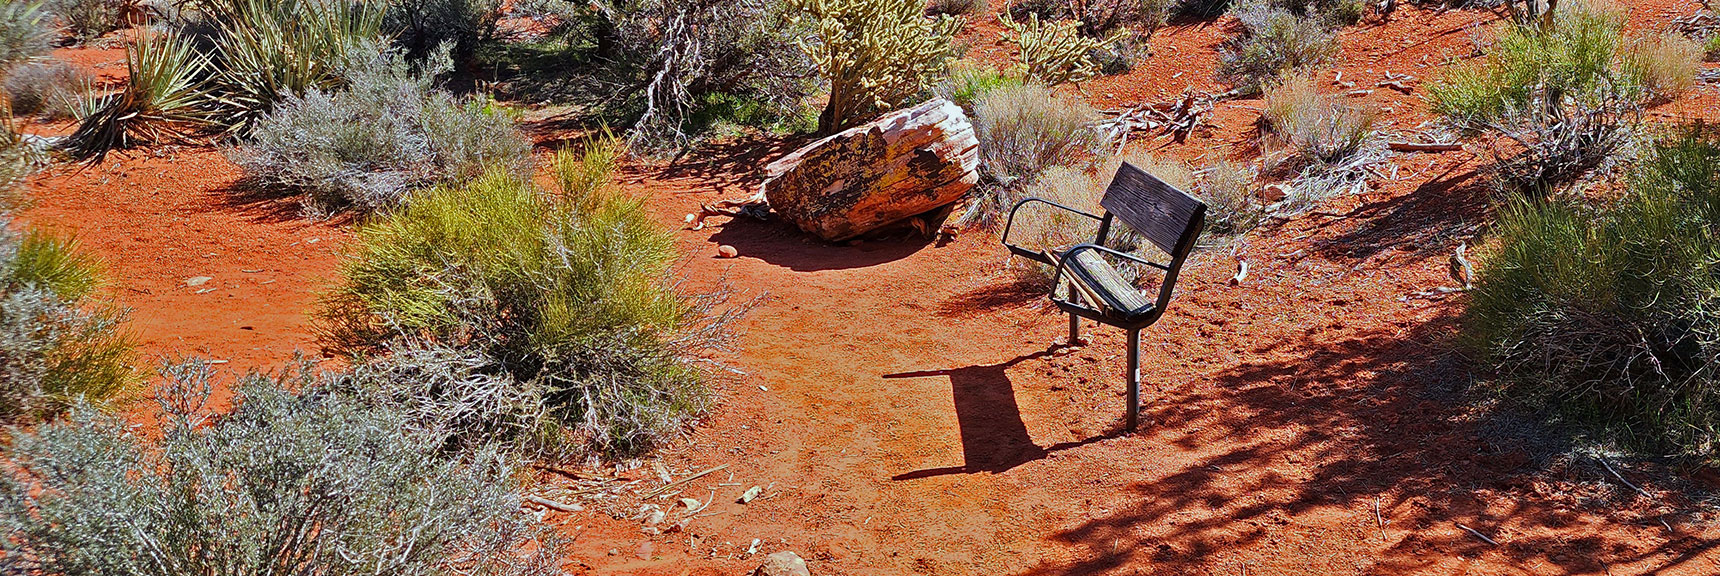 Lonely Forgotten Bench By the Trail. This Trail Seems Longer Than the Other Eastern Baseline Trails | Dales Trail | Red Rock Canyon National Conservation Area, Nevada | David Smith | LasVegasAreaTrails.com